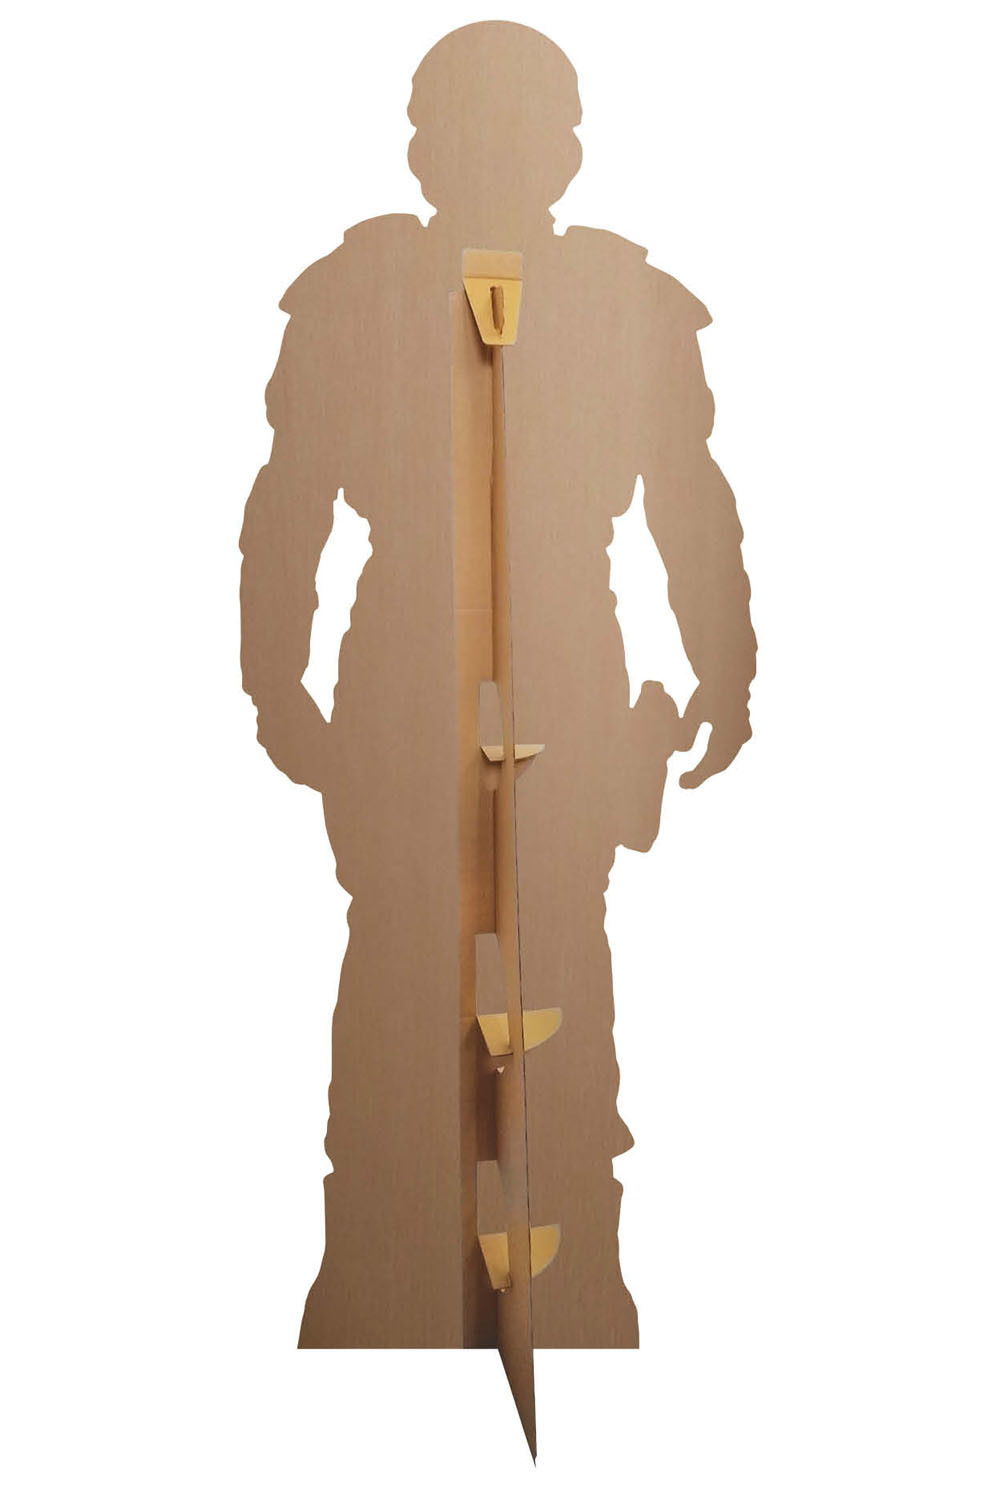 UNIT Soldier from Doctor Who Cardboard Cutout / Standee / Standup